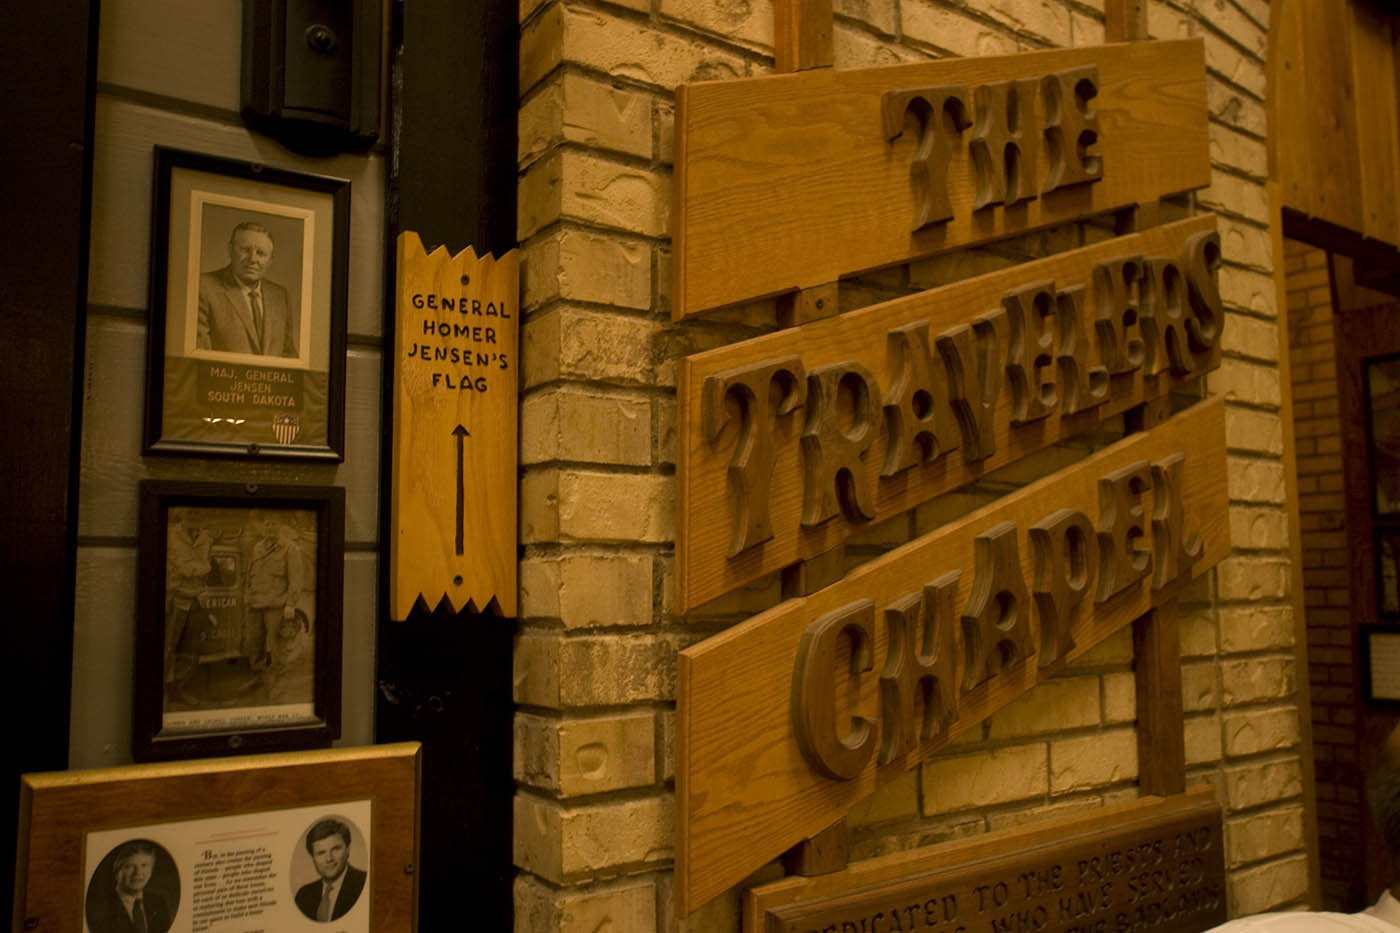 The Traveler's Chapel at Wall Drug Store in Wall, South Dakota